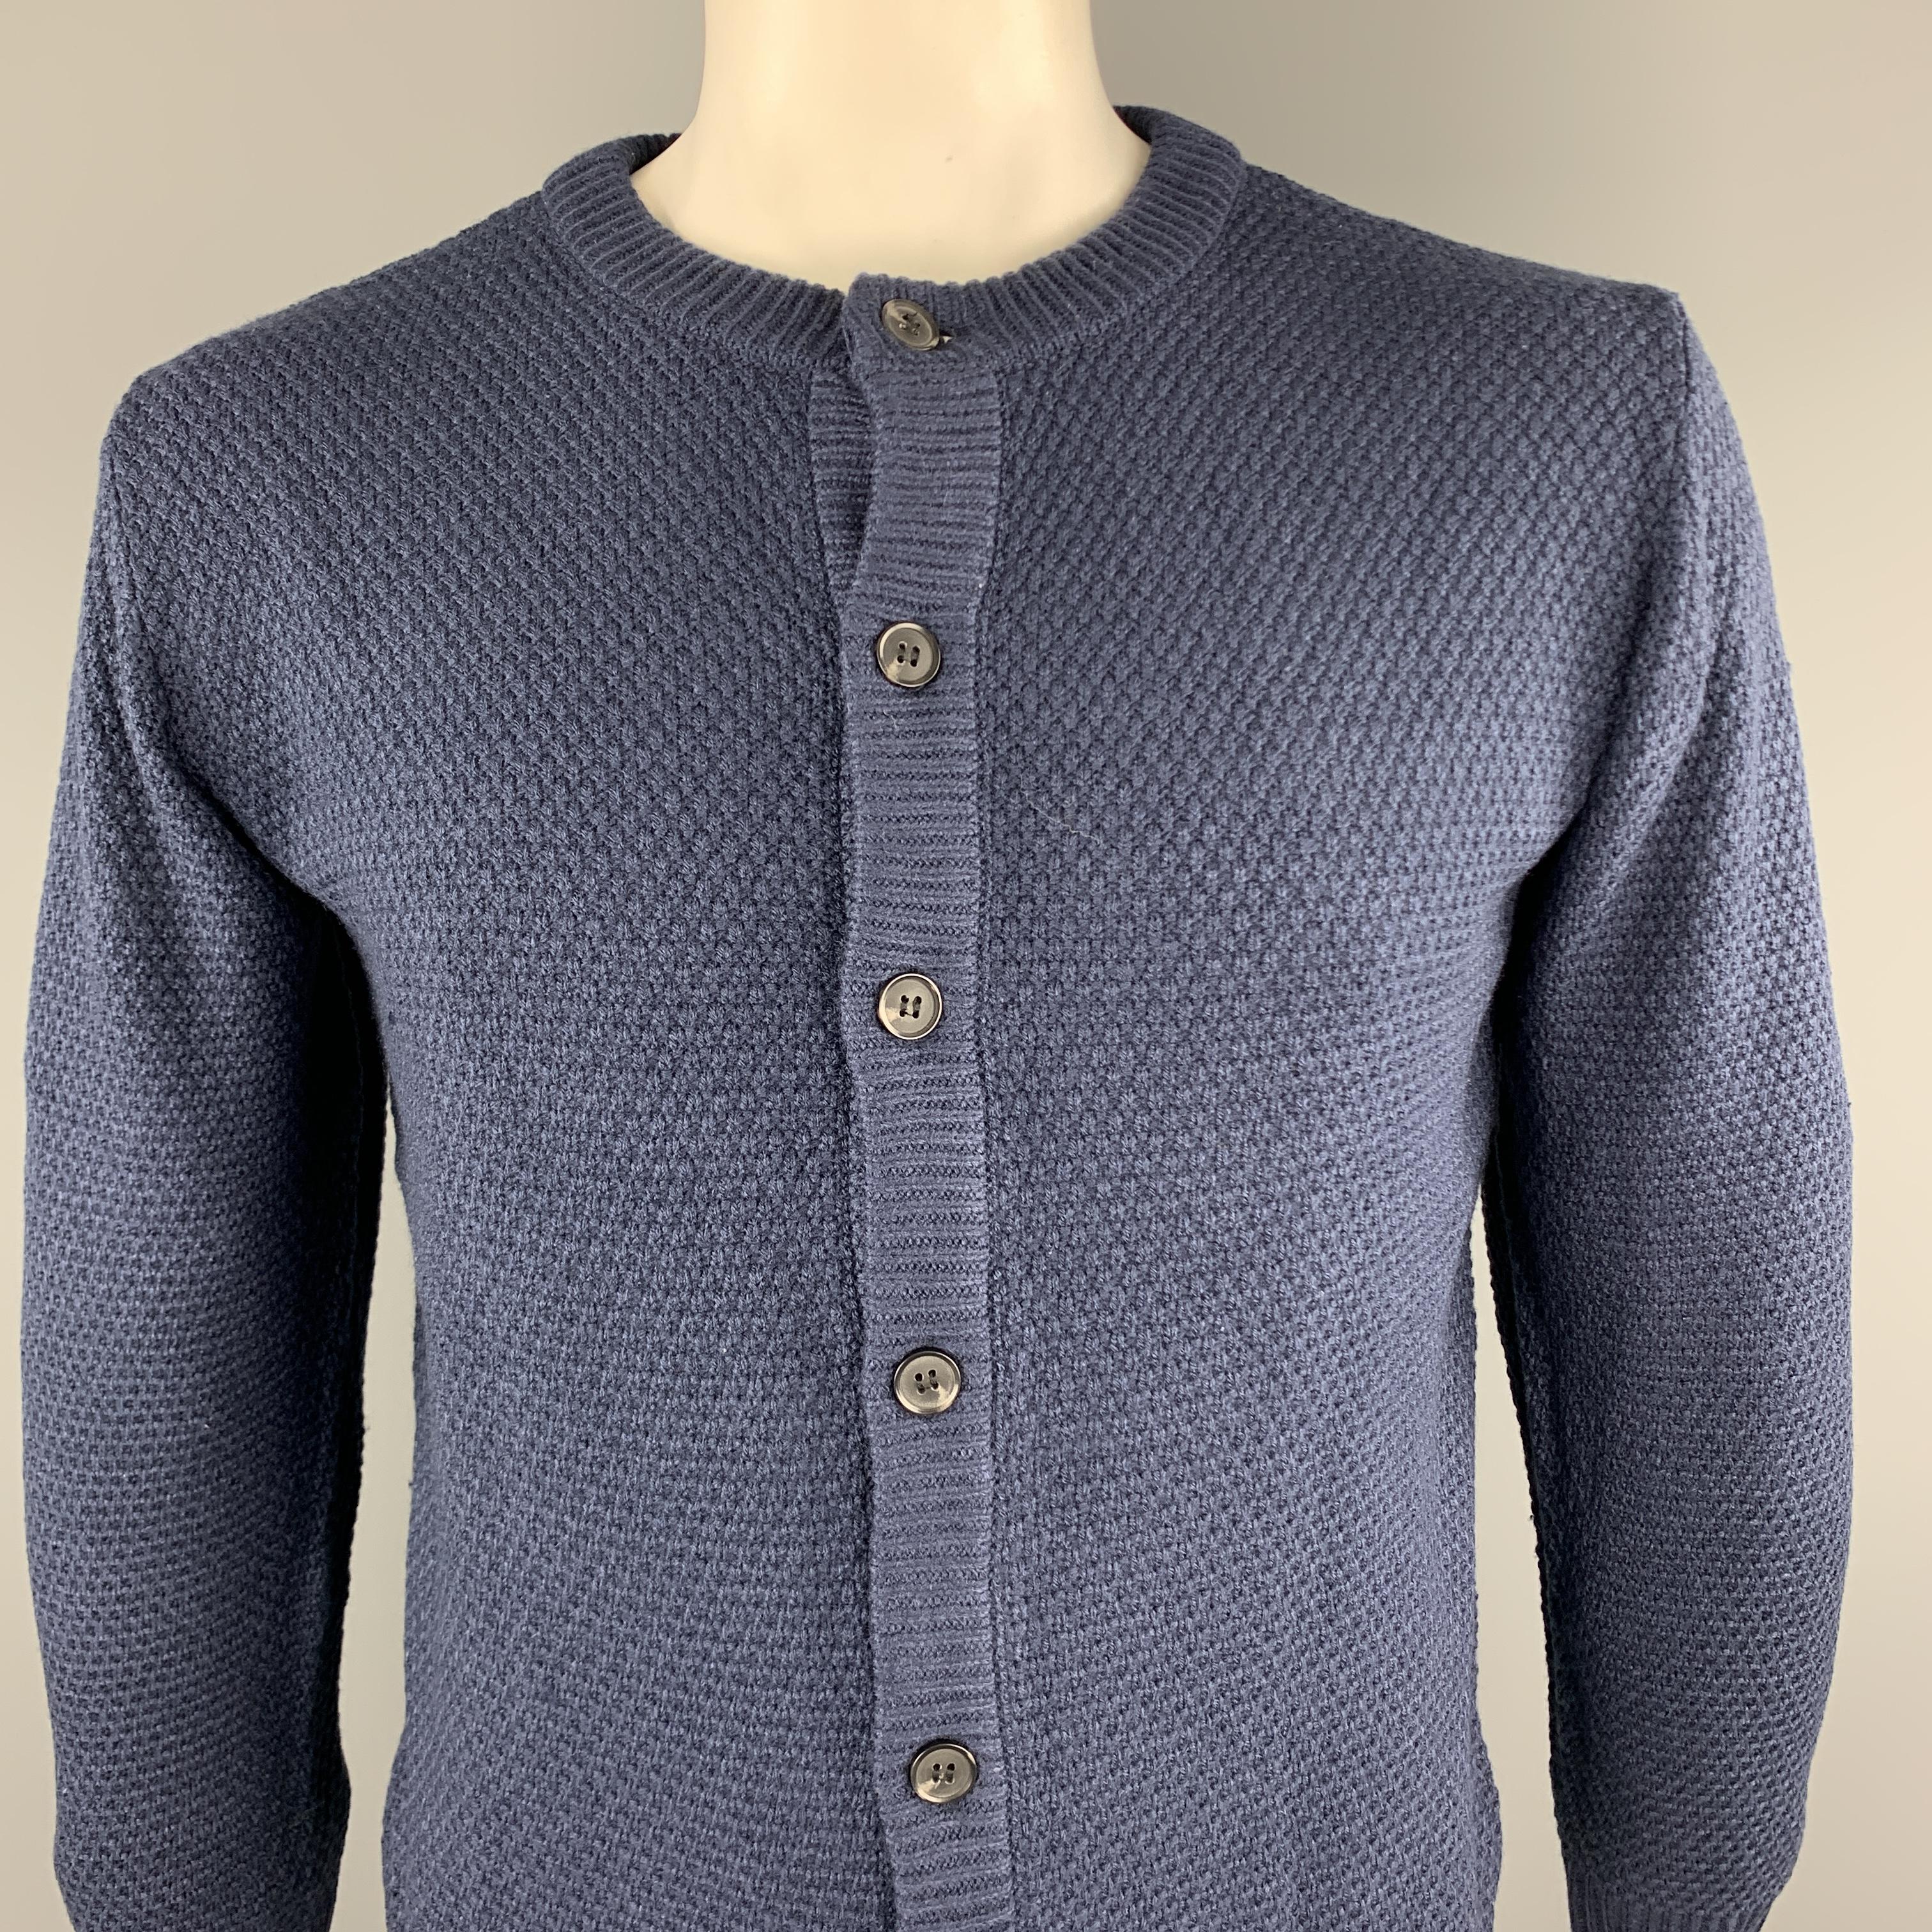 KITON cardigan sweater comes in a solid navy textured cotton material, with a ribbed collar, cuffs and hem, and a buttoned front. Made in Italy. 

New With Tags.
Marked: IT 52 / US L

Measurements:

Shoulder: 18.5 in.
Chest: 44 in.
Sleeve: 24 in.